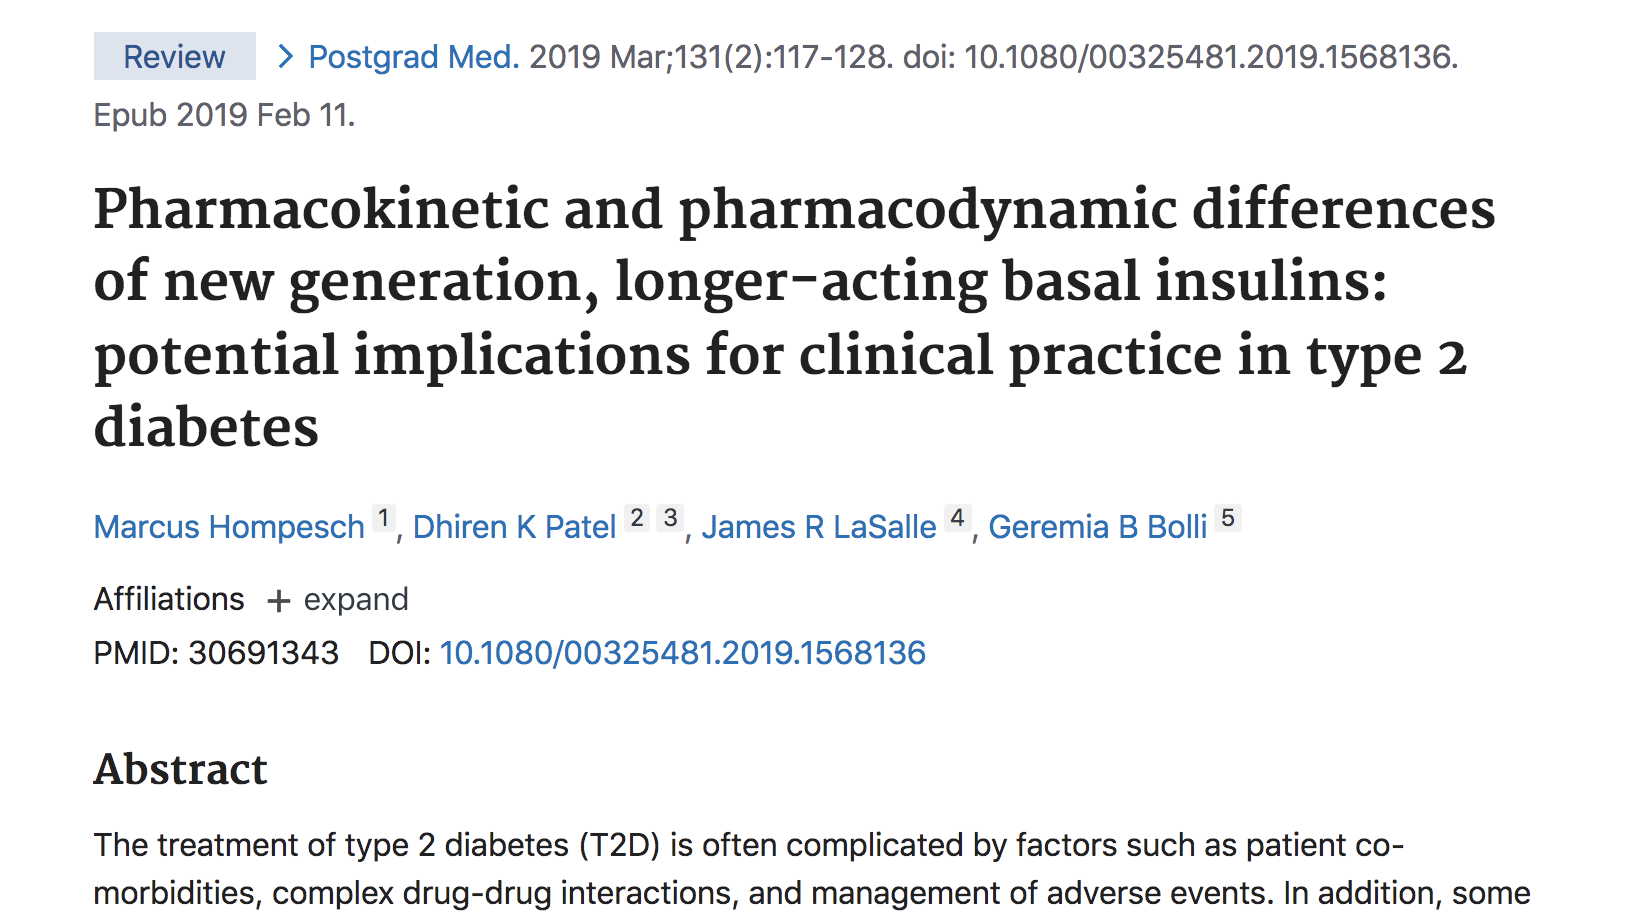 image of Pharmacokinetic and pharmacodynamic differences of new generation, longer-acting basal insulins: potential implications for clinical practice in type 2 diabetes